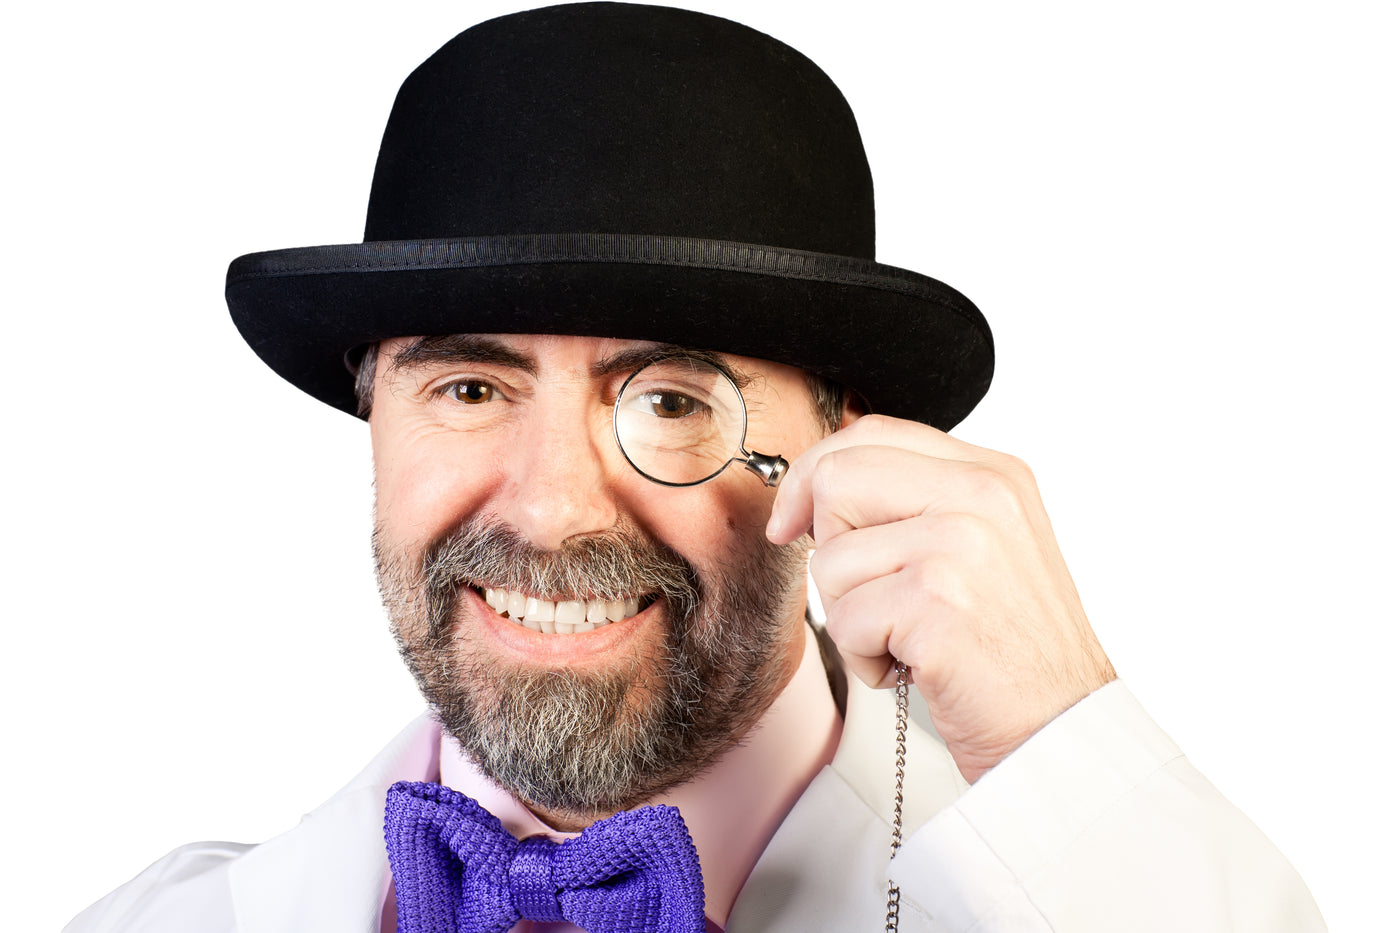 Portrait of happy middle-aged man in a hat with a monocle